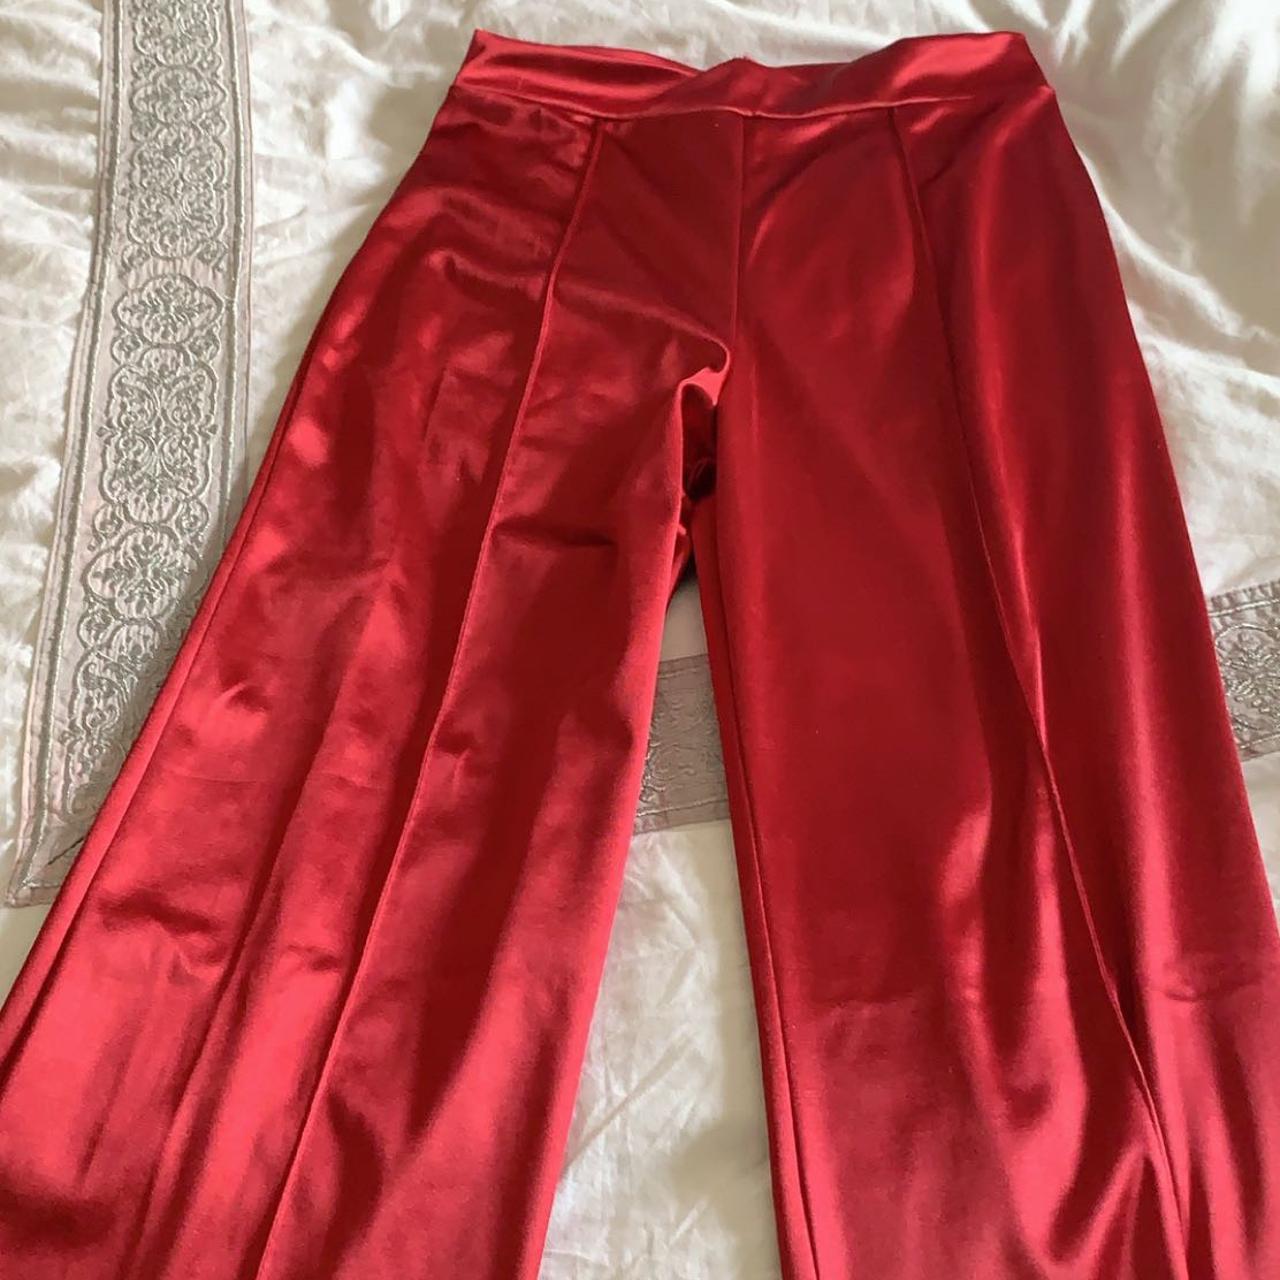 High waisted red satin pants ( very flowy at the... - Depop